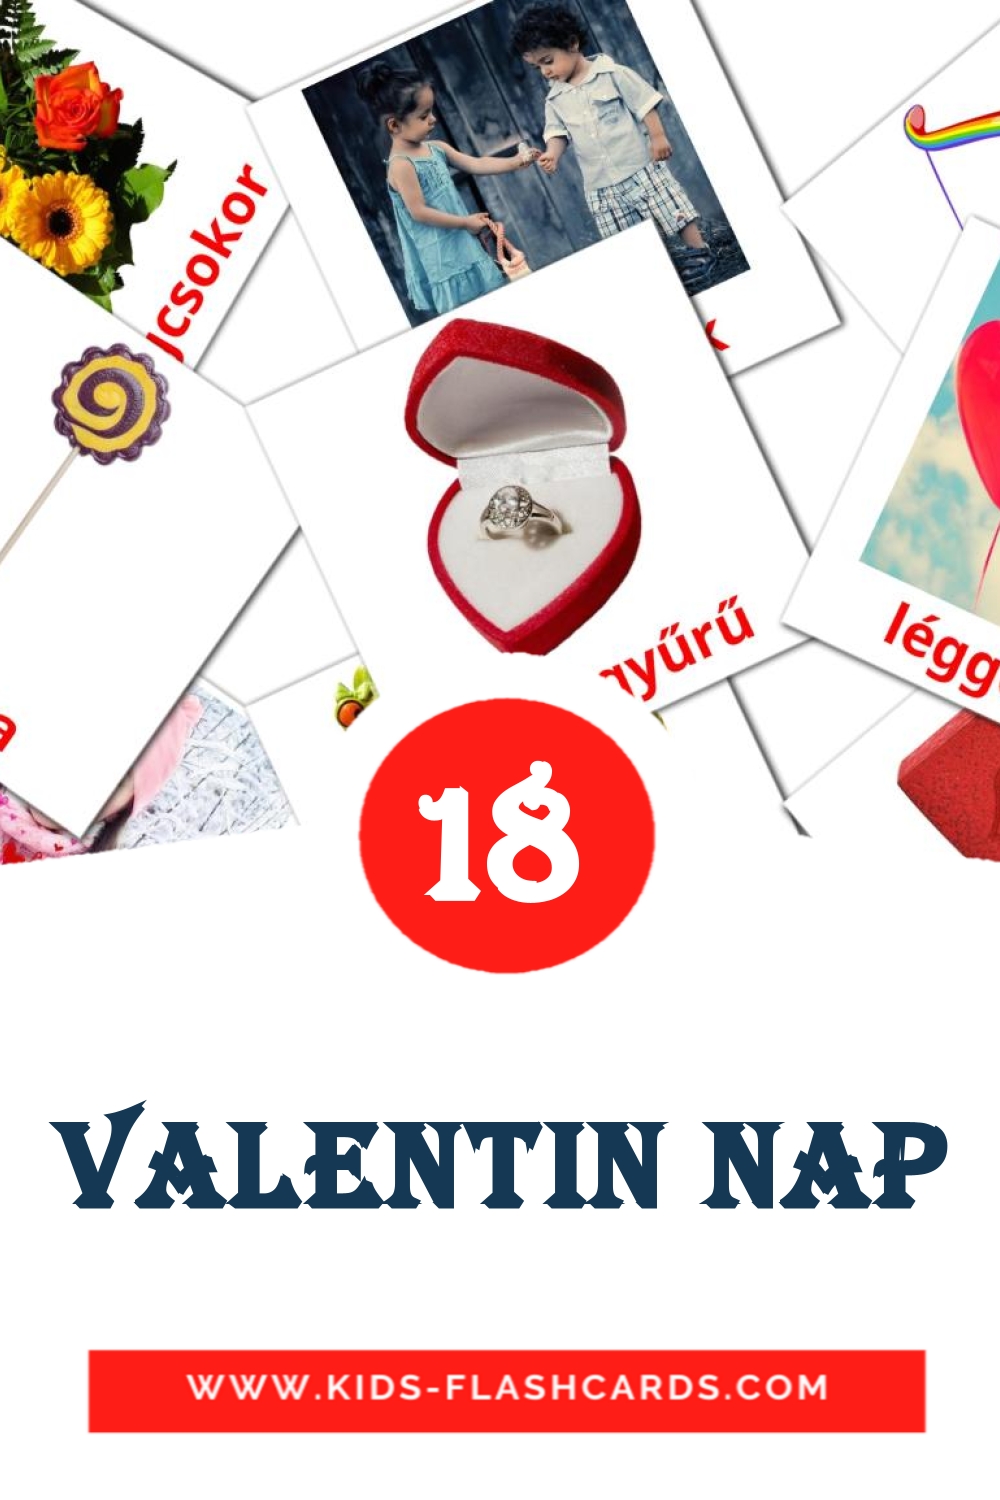 18 Valentin nap Picture Cards for Kindergarden in hungarian